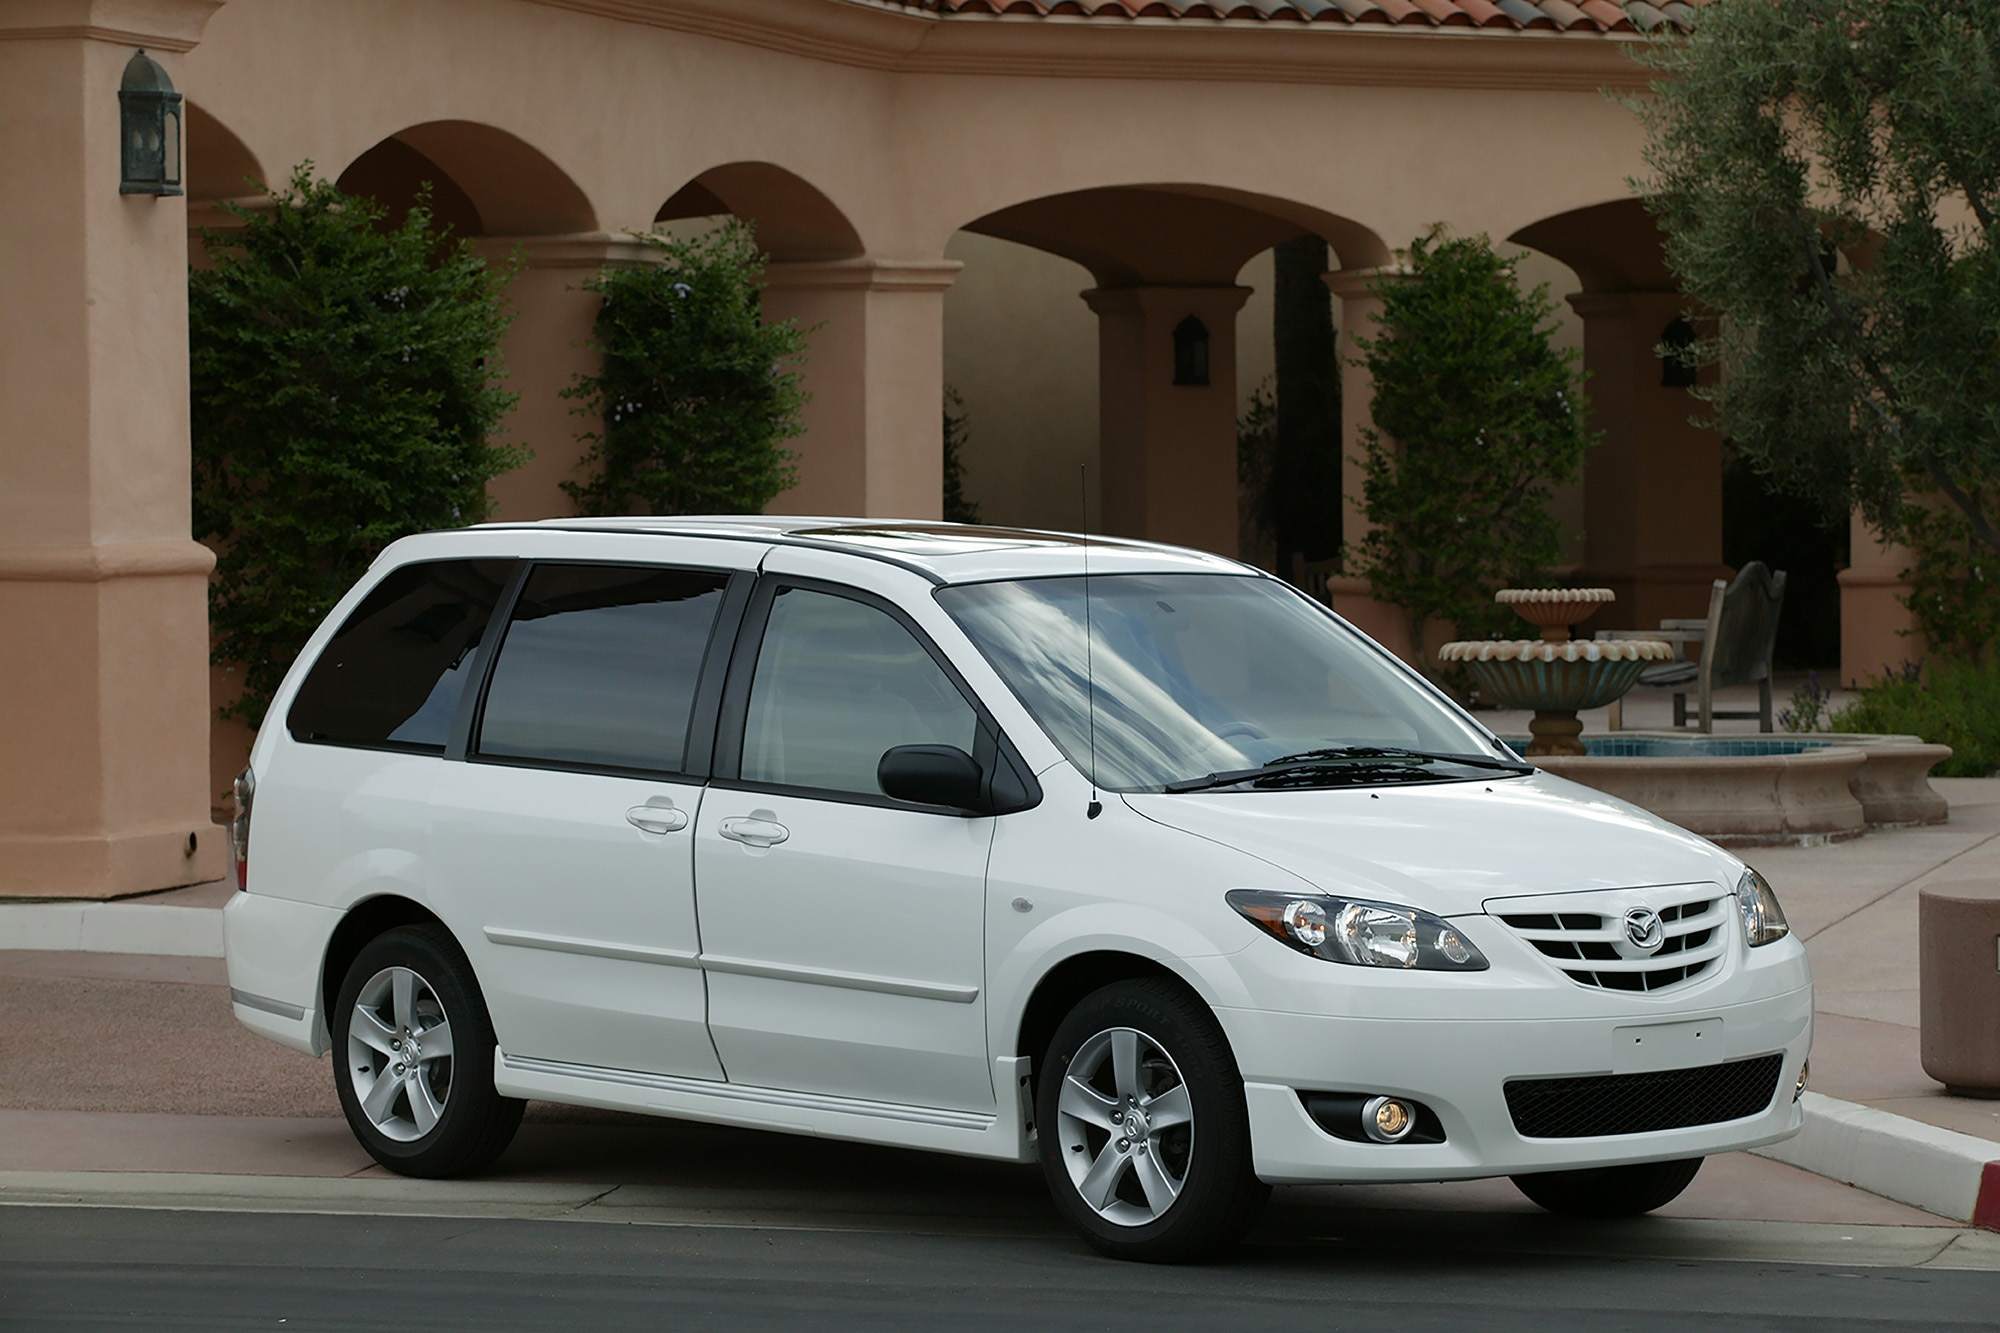 2005 Mazda MPV in white parked in front of a building with columns.